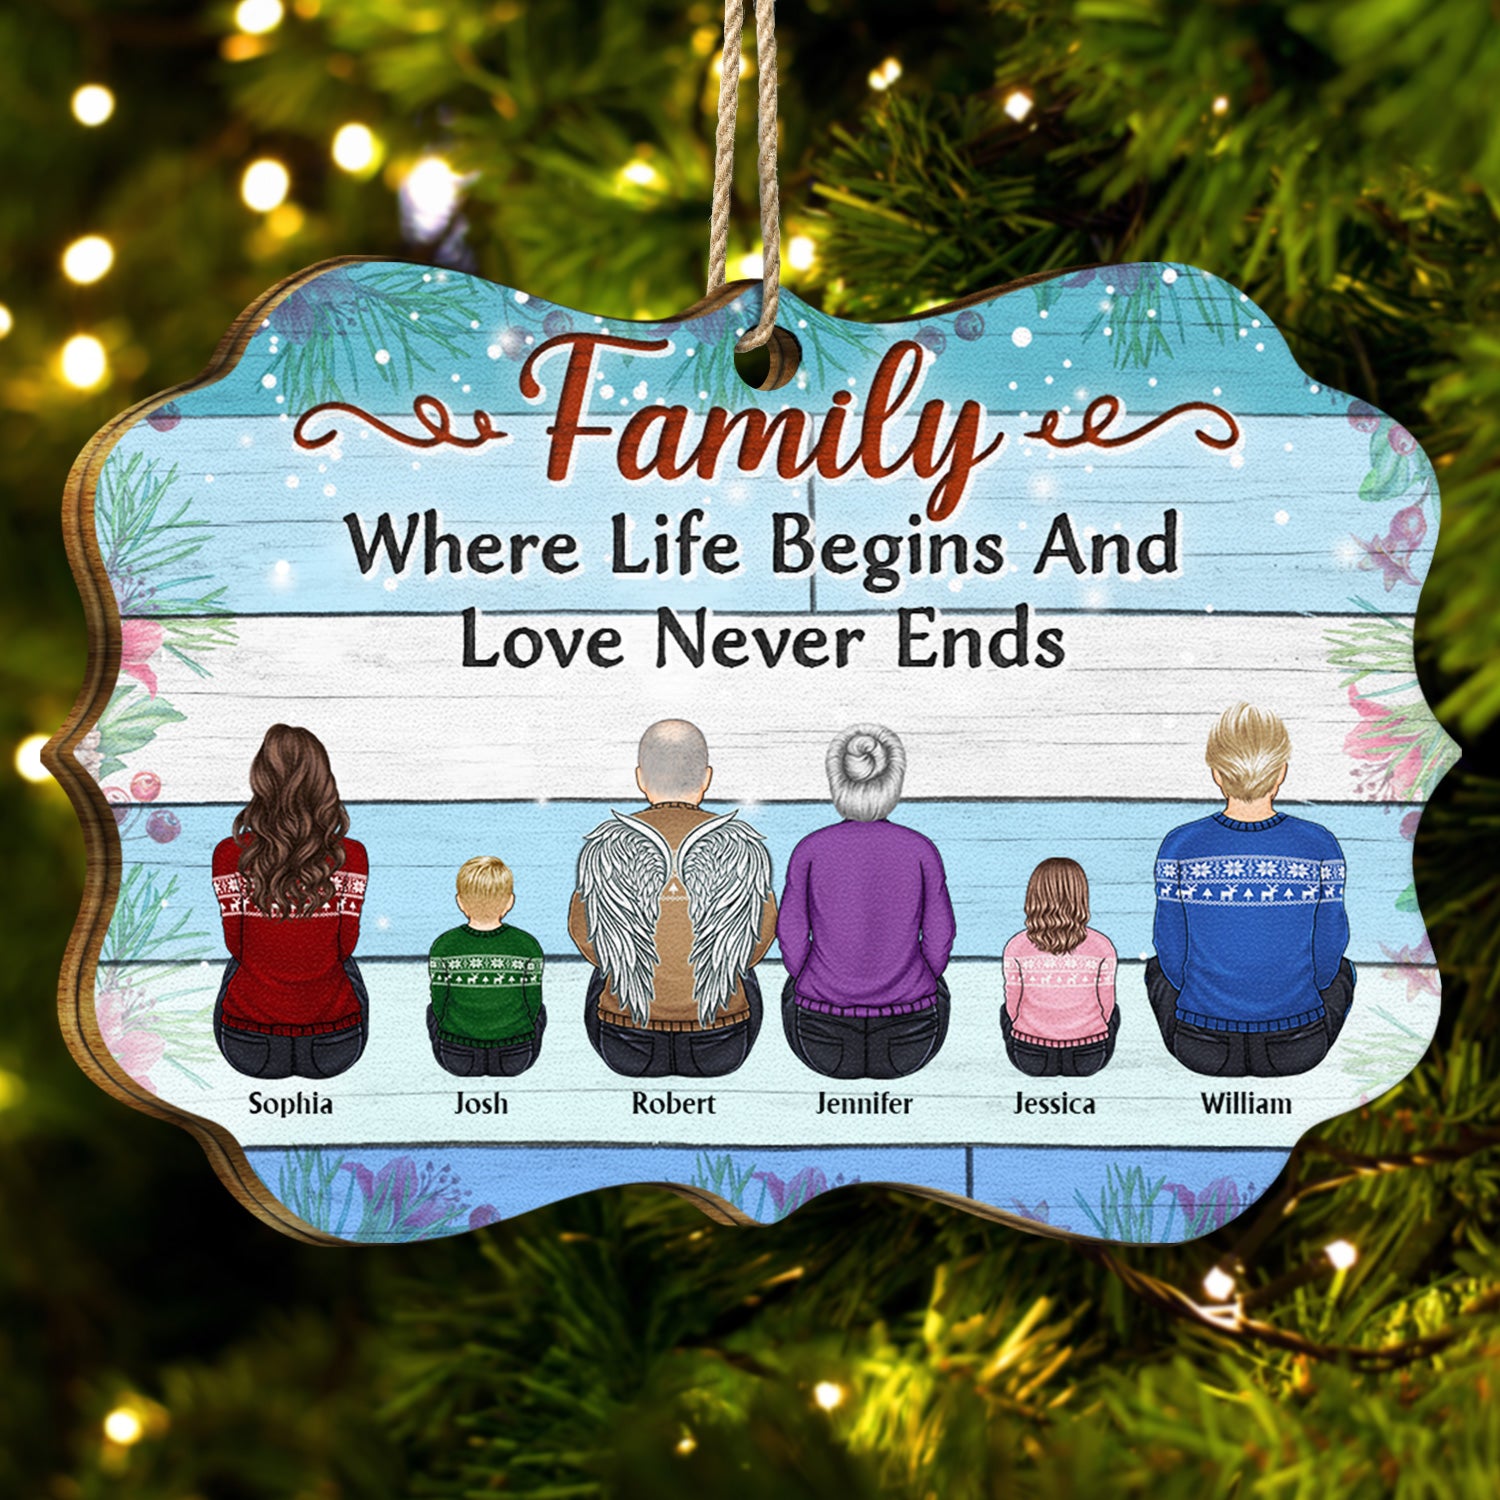 Family Where Begins And Love Never Ends - Memorial Gift - Christmas Gift - Personalized Wooden Ornament